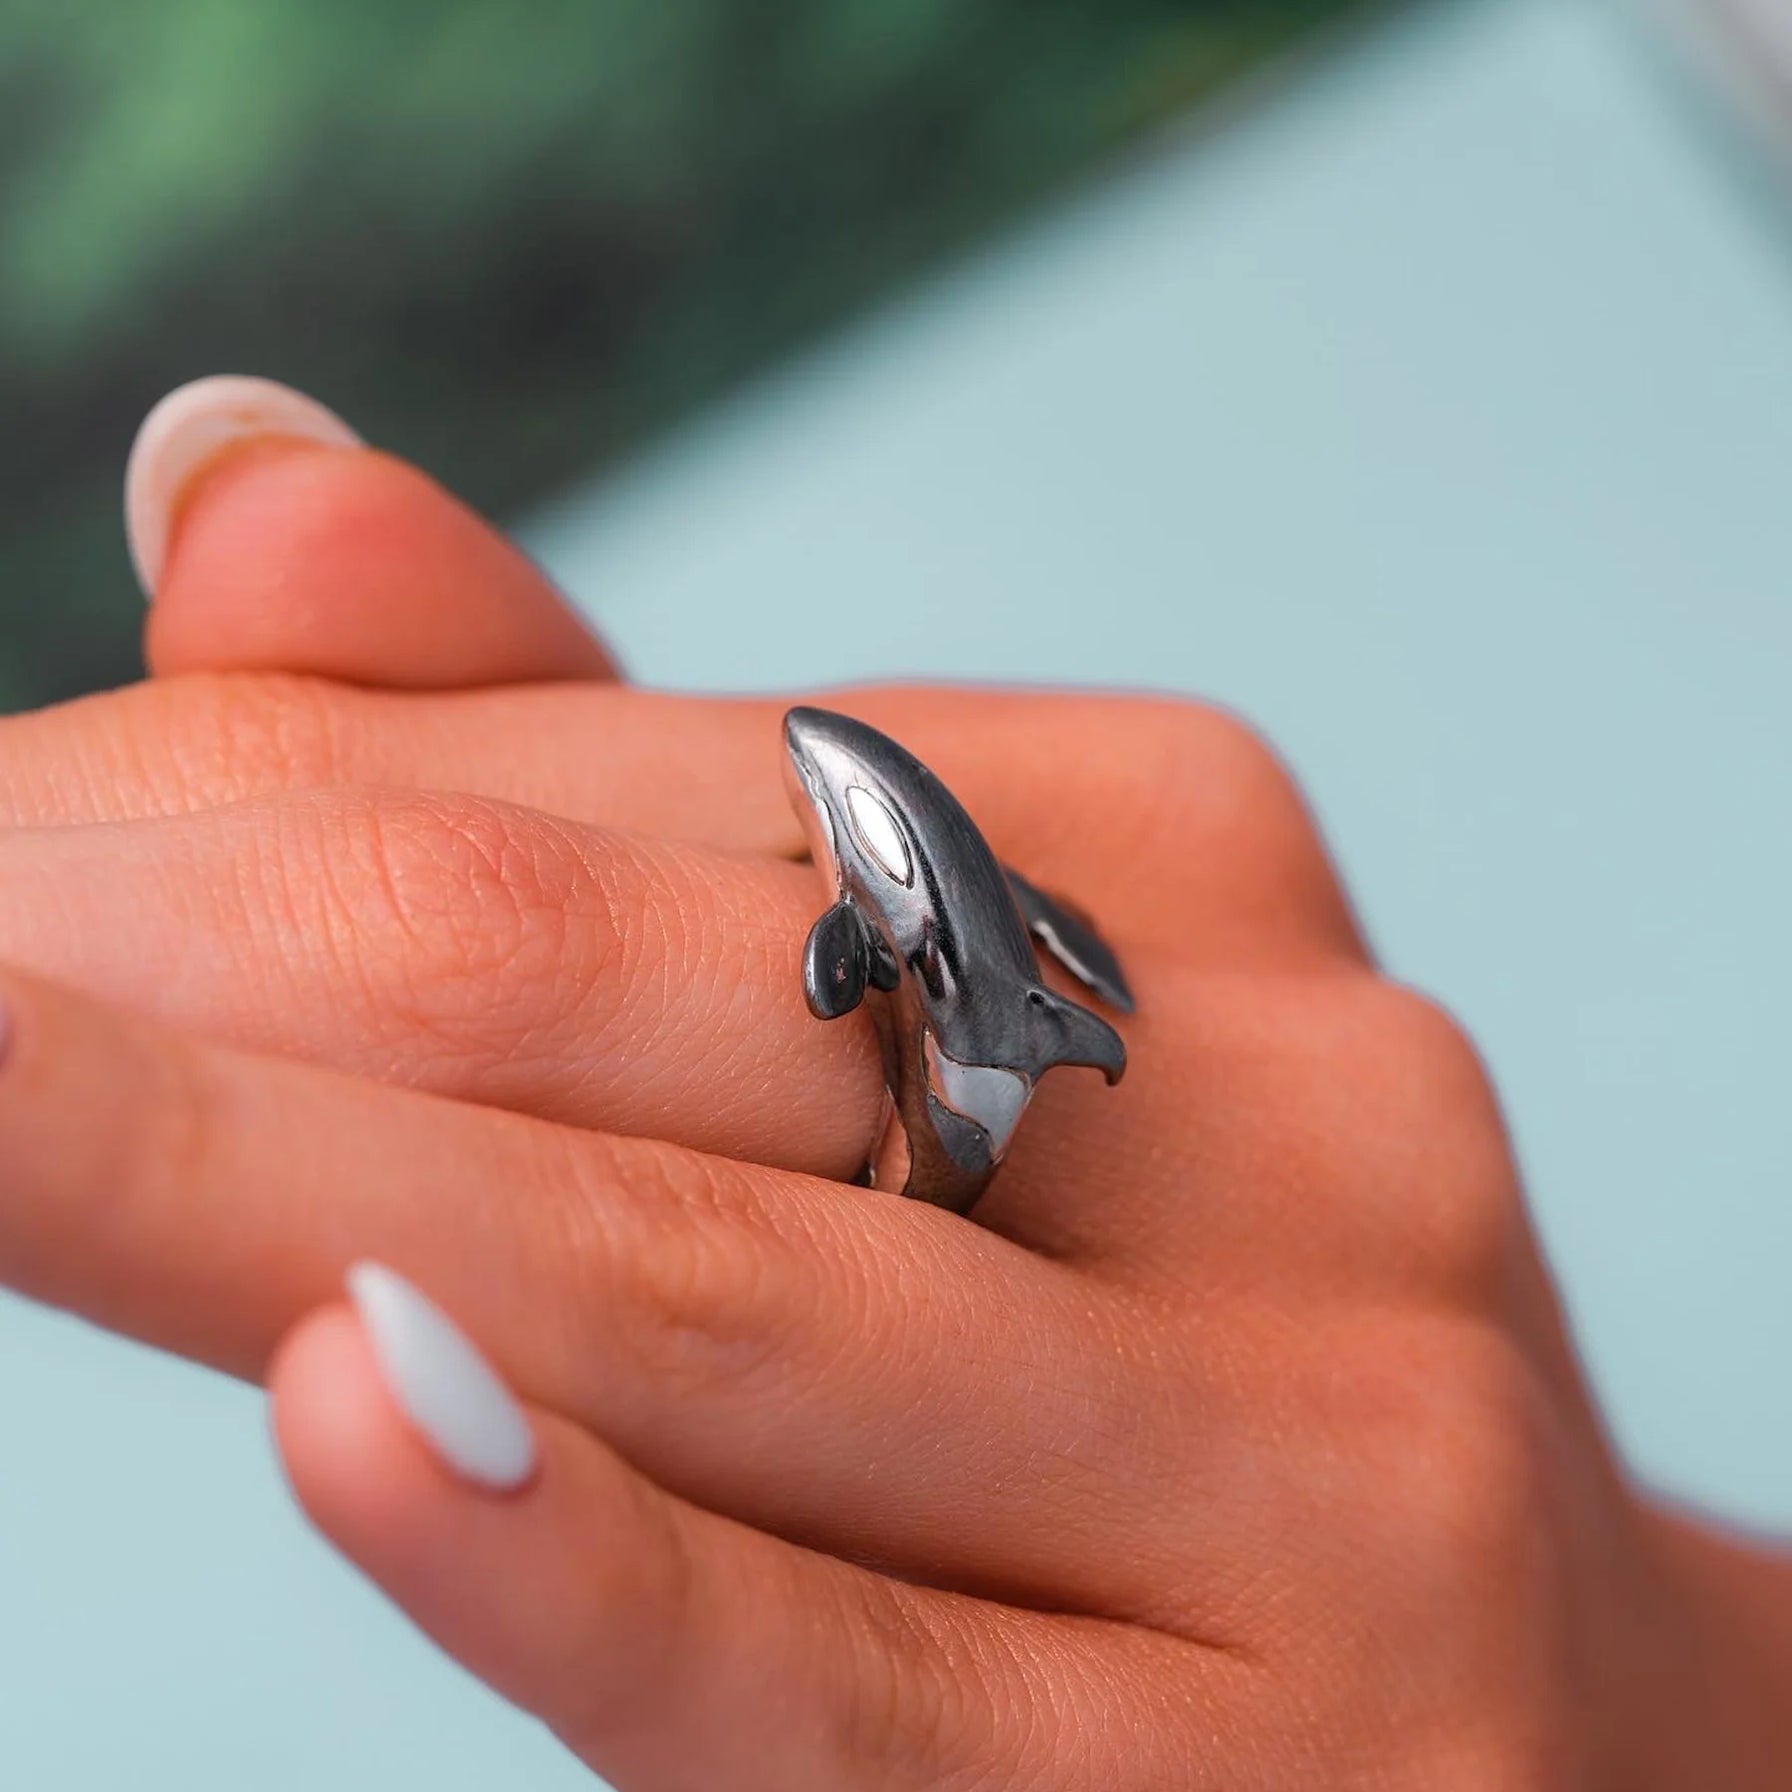 Silver Ring Shaped like a Killer Whale